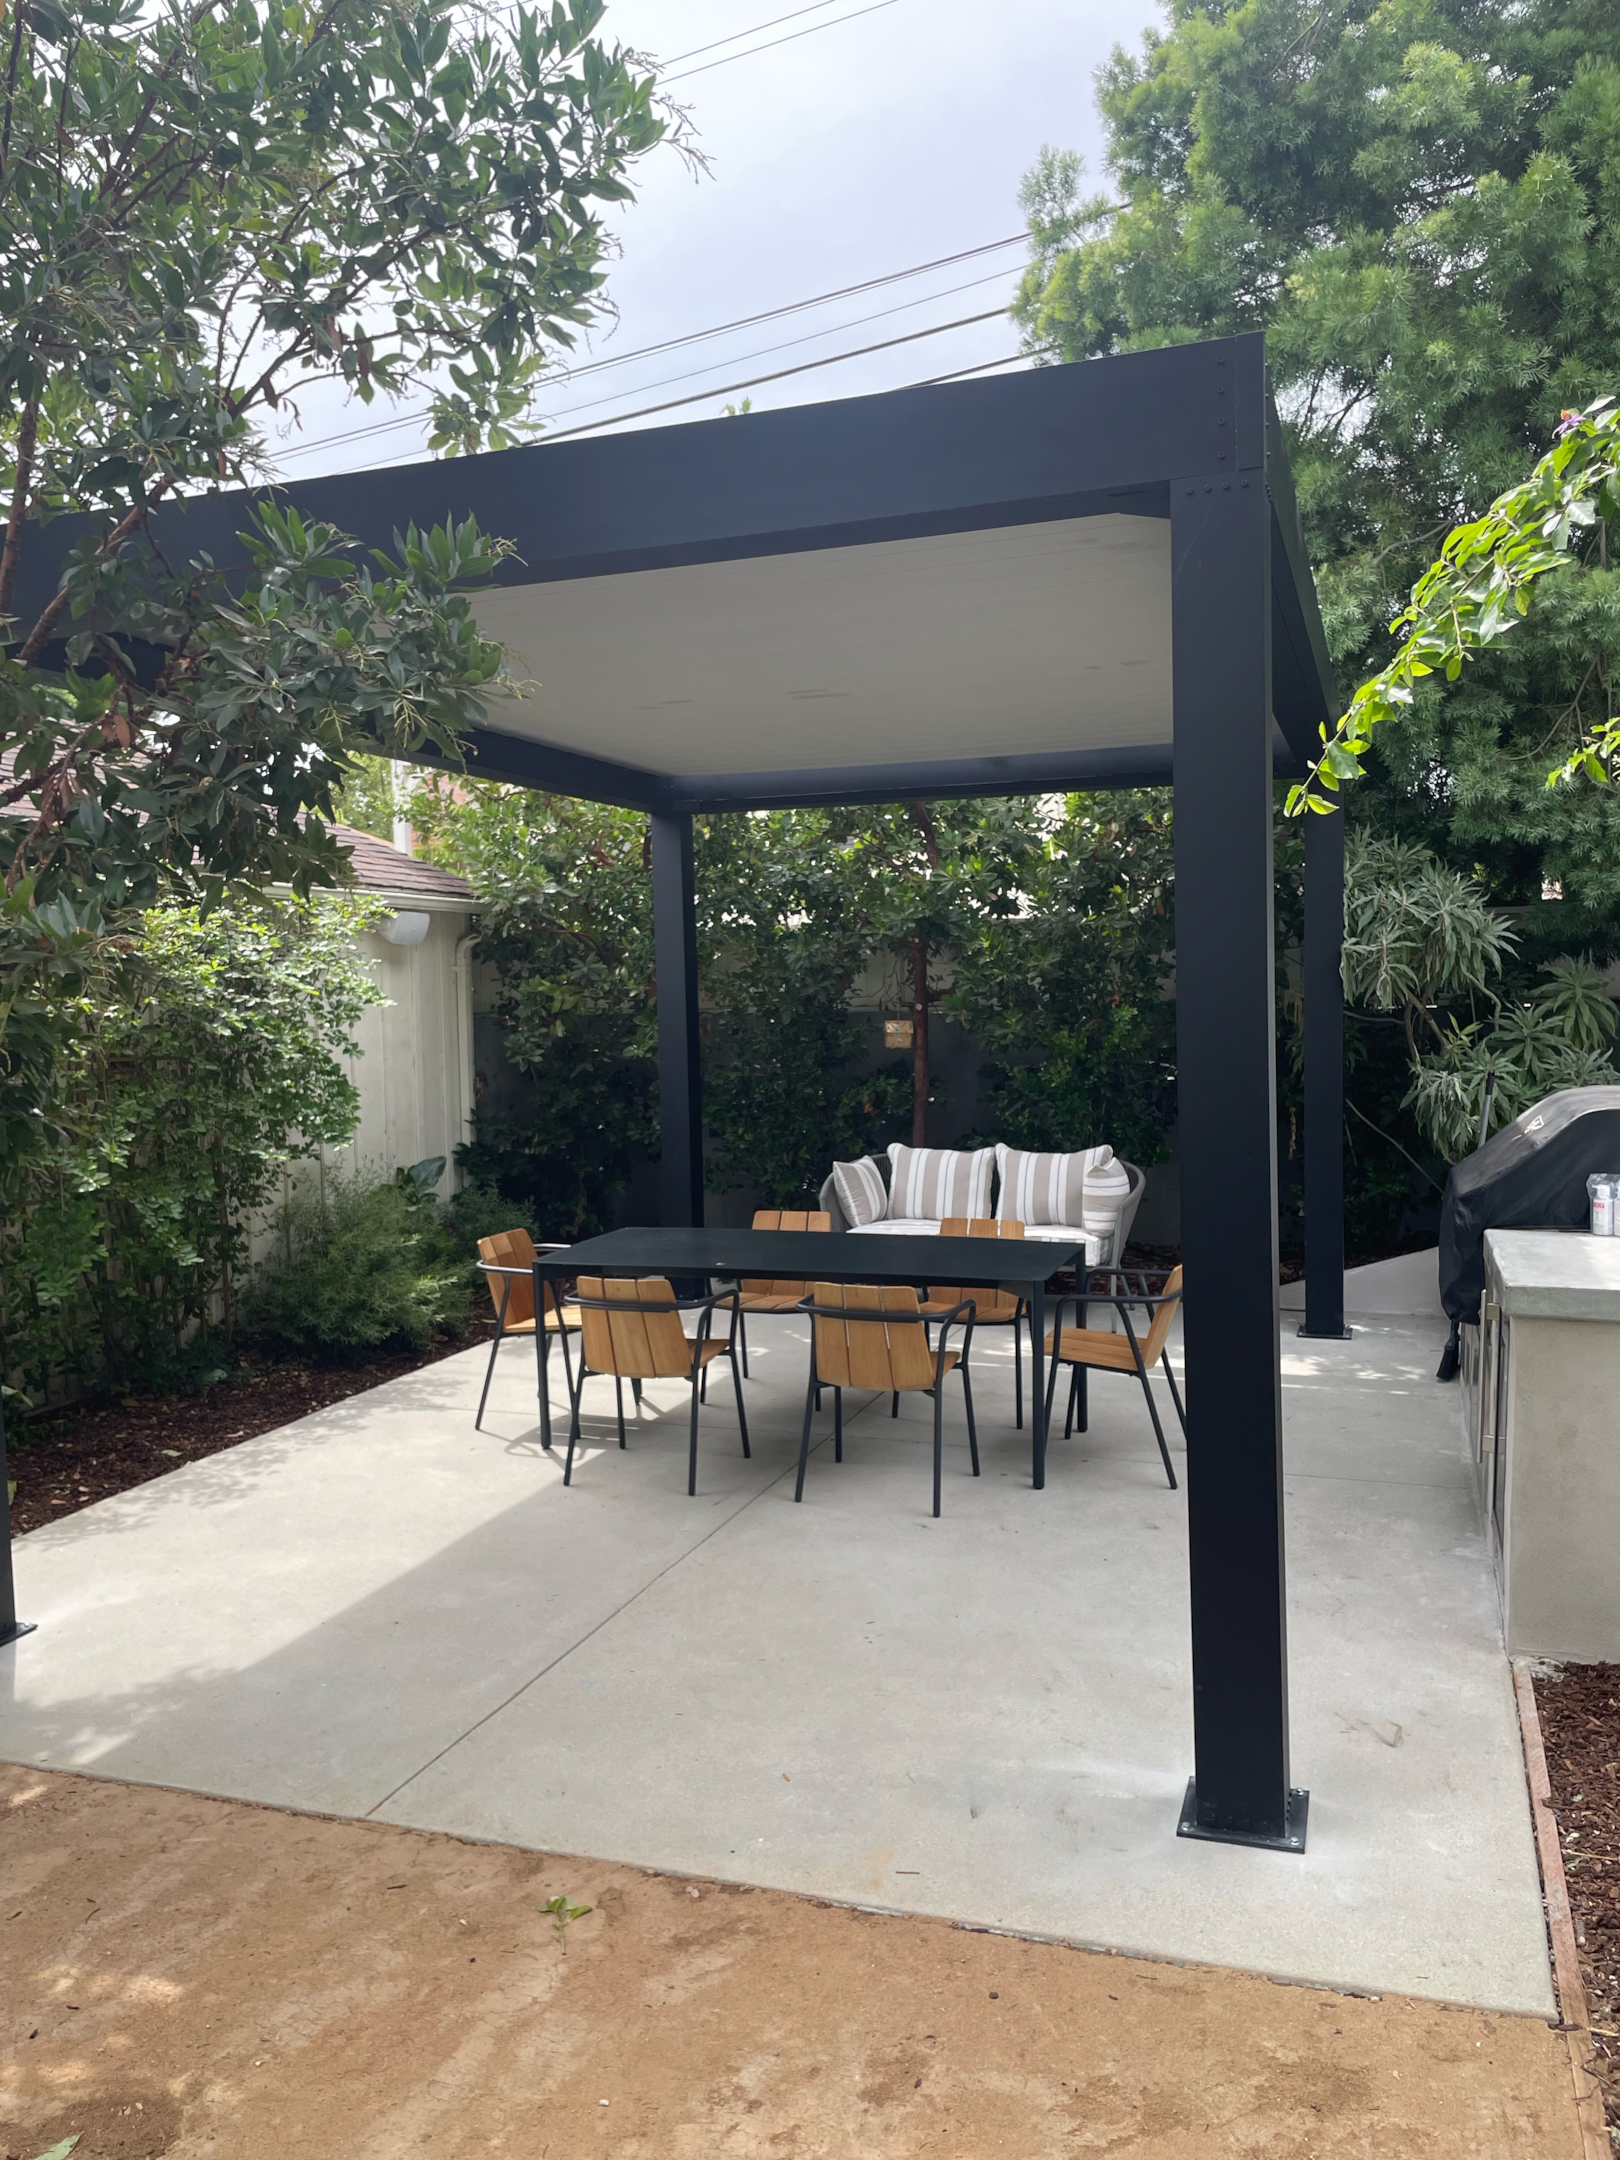 instead of retractable canopy, this customer used a pergola to cover their outdoor space